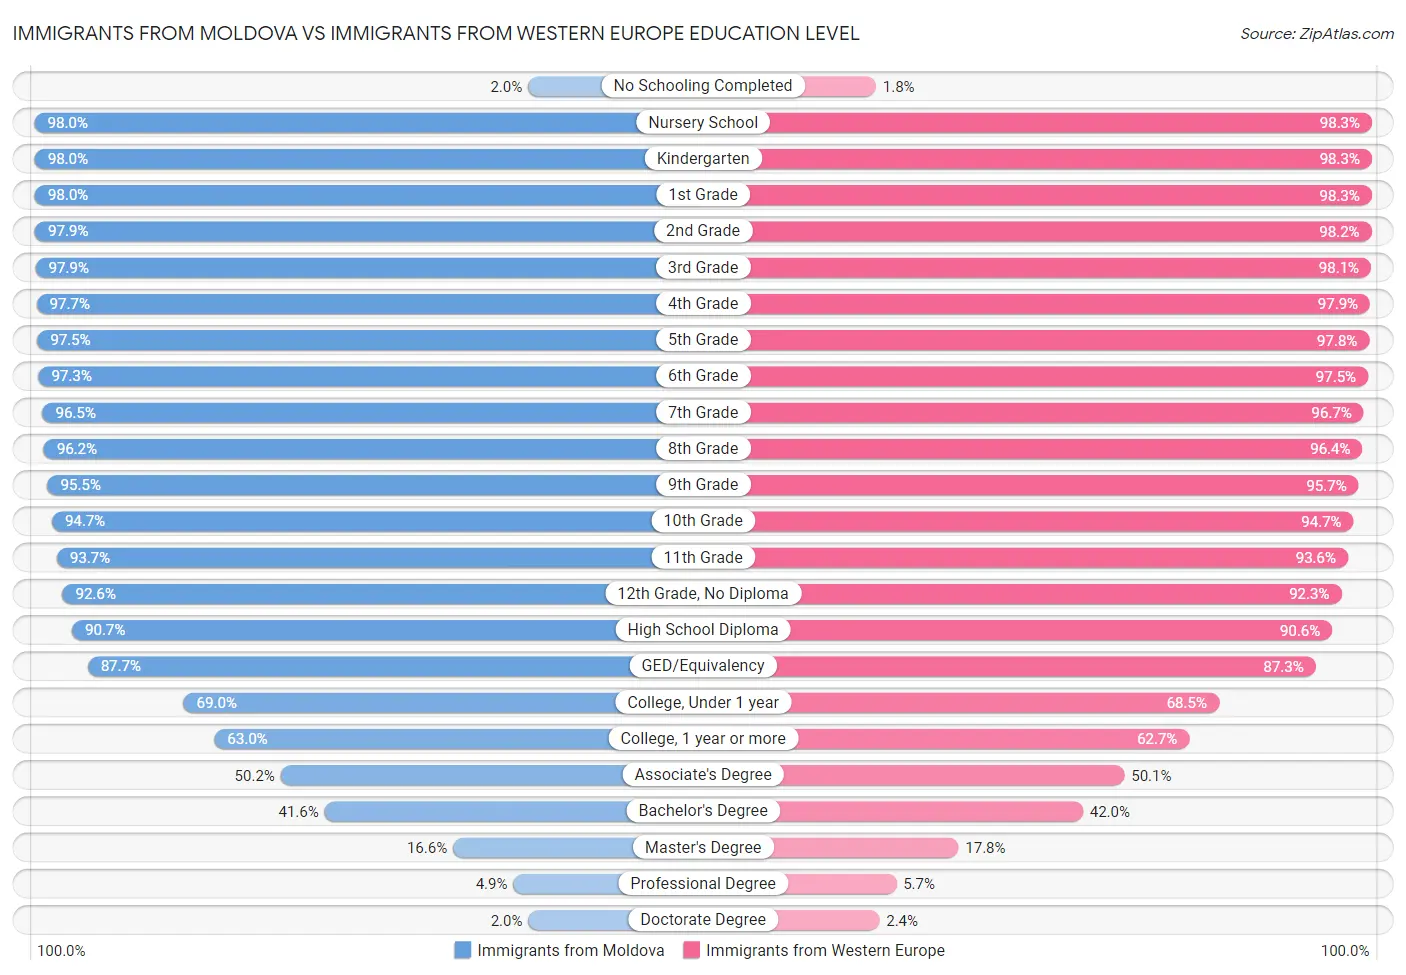 Immigrants from Moldova vs Immigrants from Western Europe Education Level